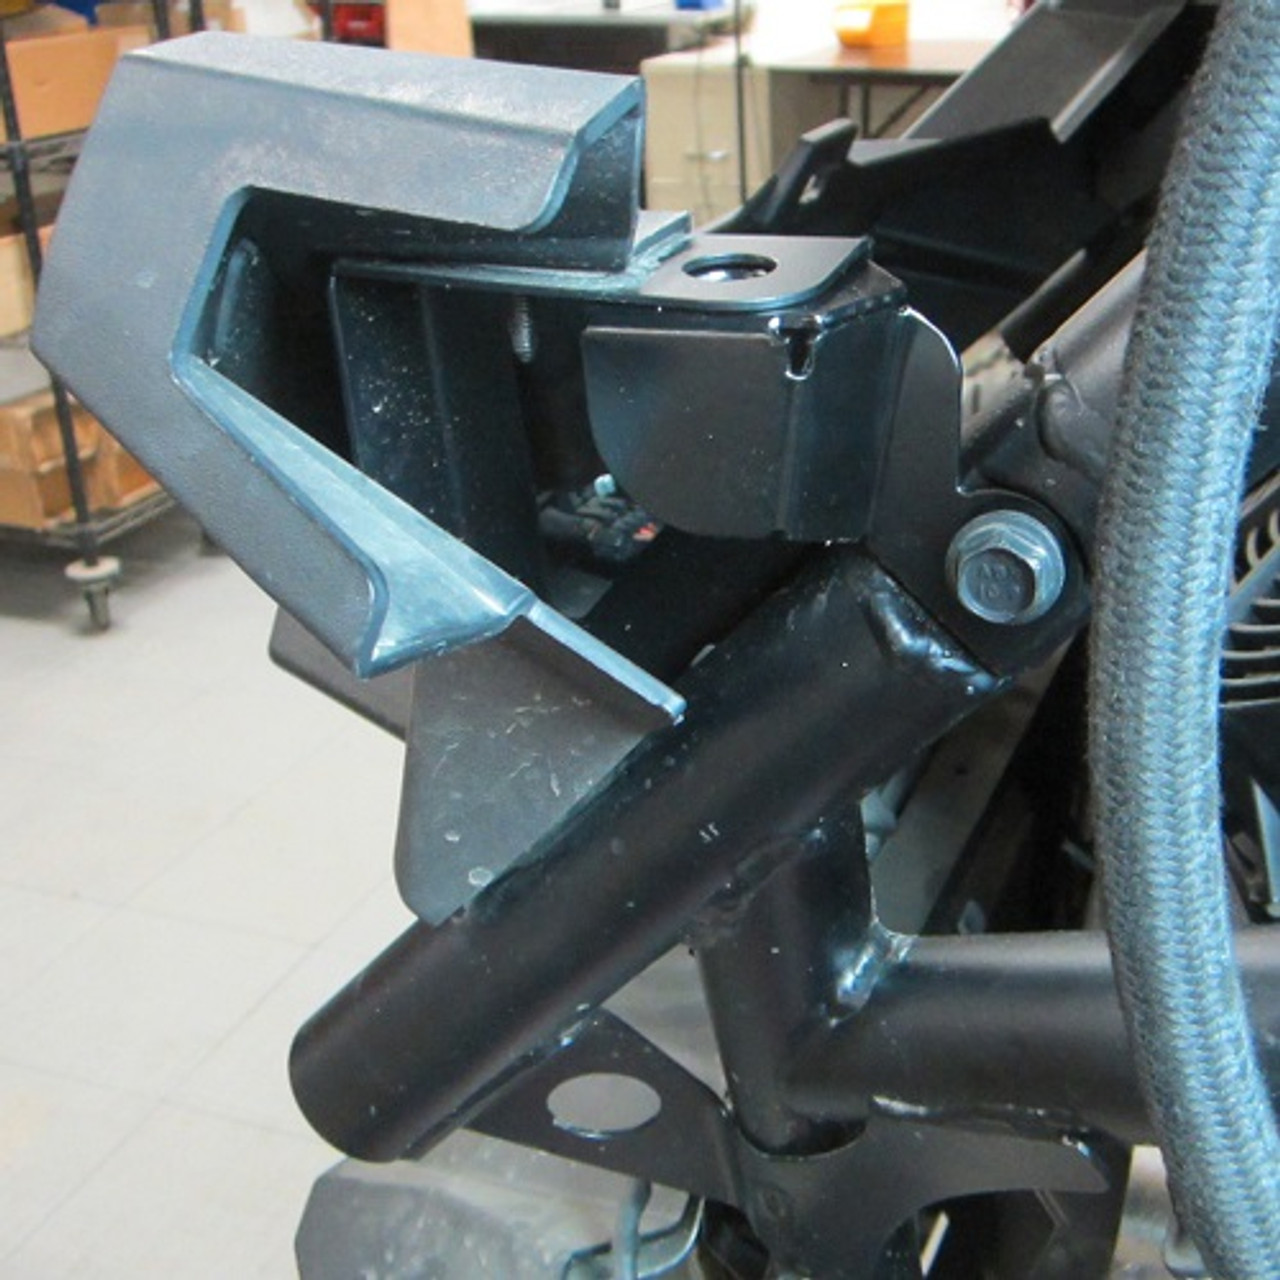 Installed, shown with fender removed, right-side